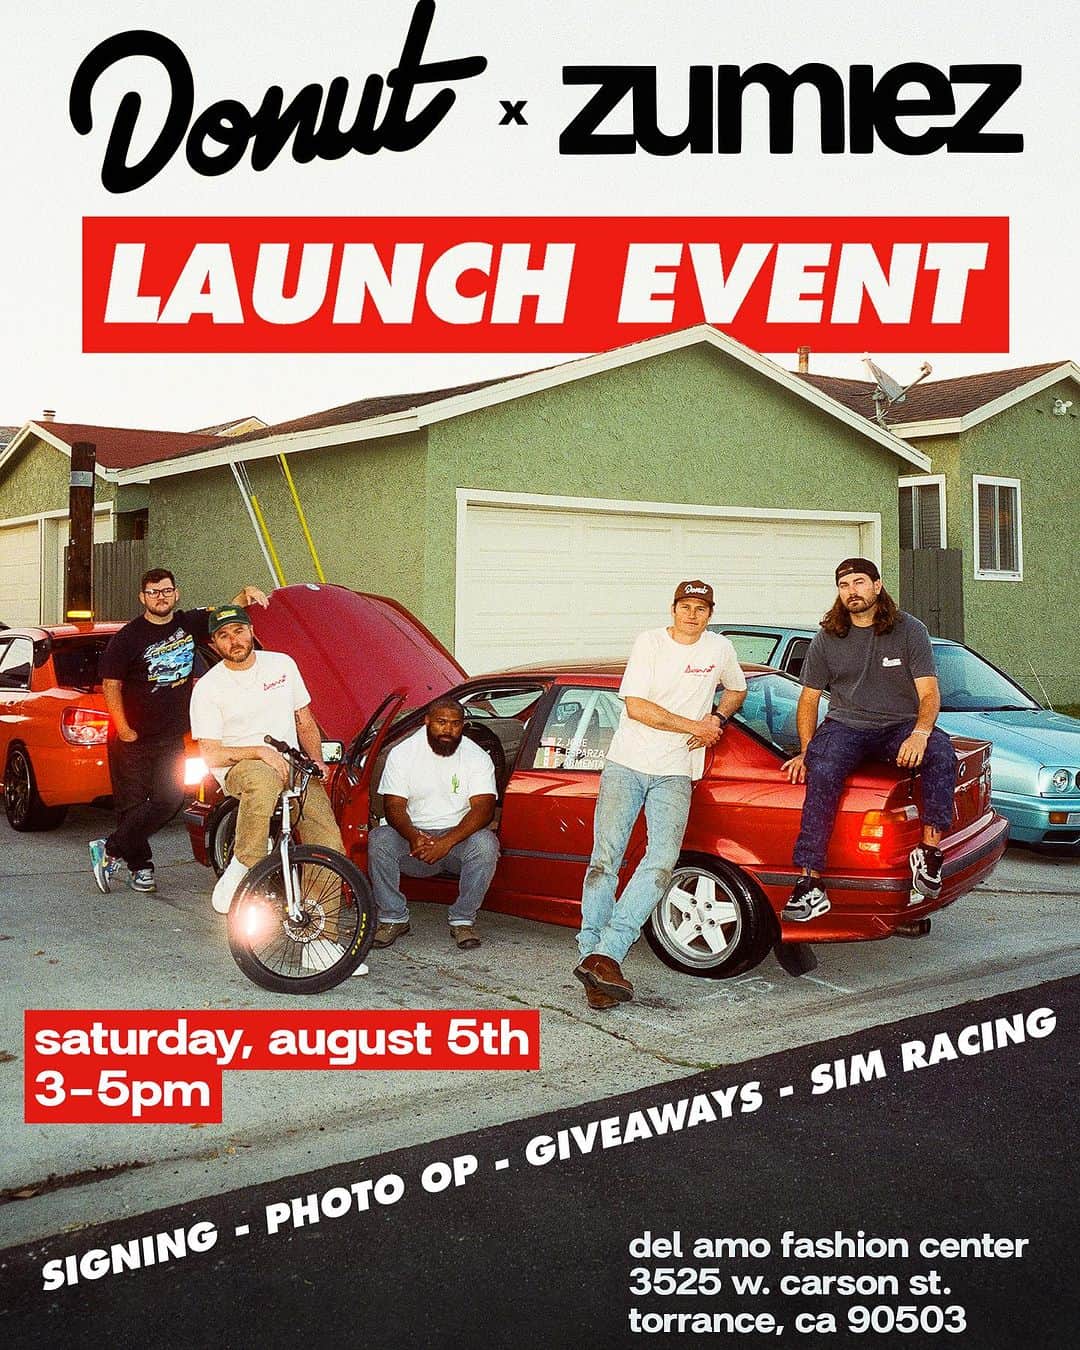 zumiezのインスタグラム：「HUGE NEWS!!🎉🎉Starting August 5th, Donut apparel and accessories can be found in EVERY @zumiez store across the US and Canada. To celebrate, we’re having a launch event that Saturday, August 5th at Zumiez Del Amo Fashion Center in Torrance, CA from 3-5pm. Meet the guys, get some stuff signed, and hop on a racing sim. Donut’s in the mall. Come see us🍩🎉🥳」